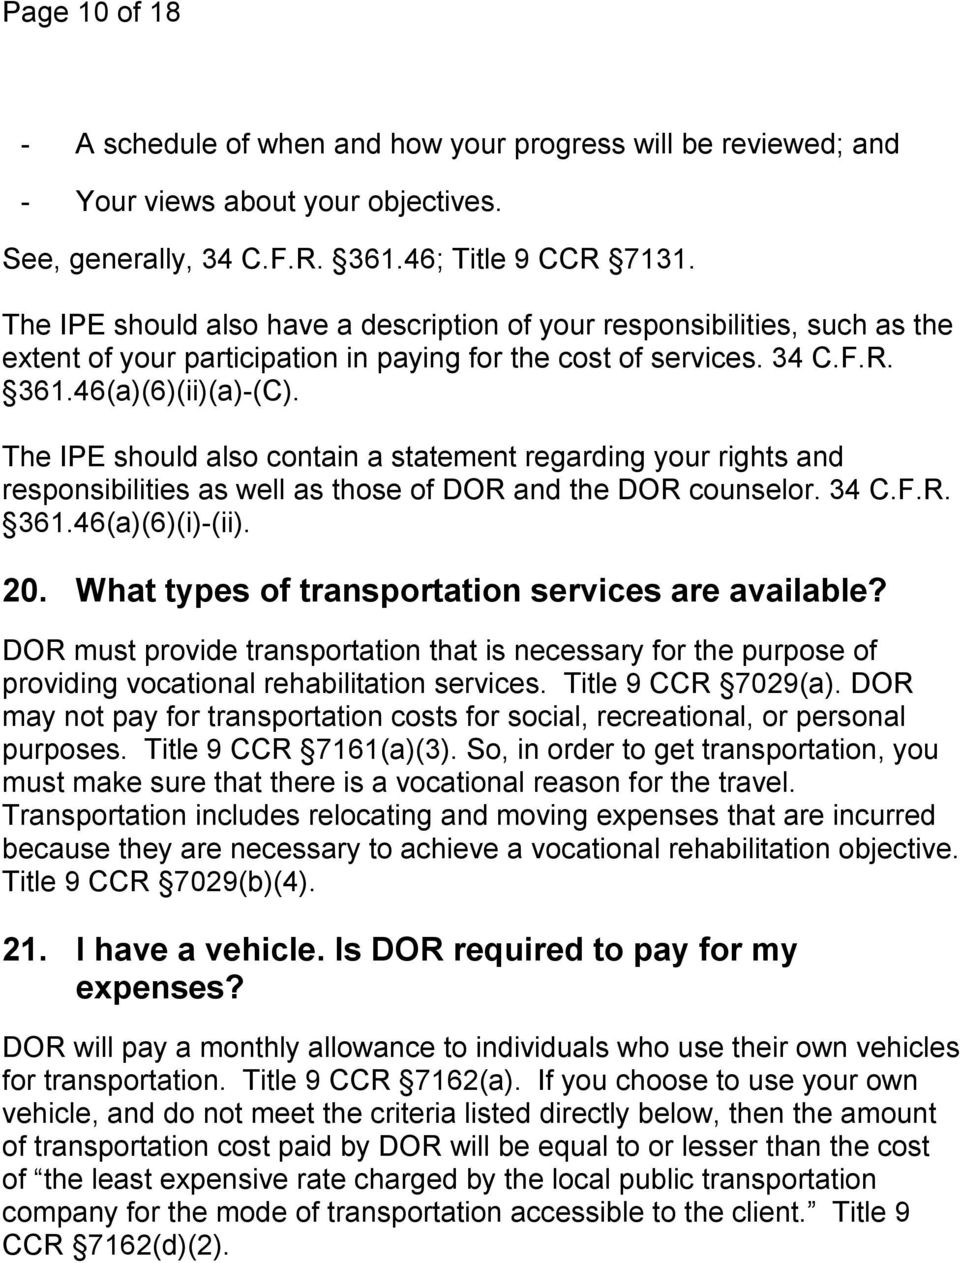 The IPE should also contain a statement regarding your rights and responsibilities as well as those of DOR and the DOR counselor. 34 C.F.R. 361.46(a)(6)(i)-(ii). 20.